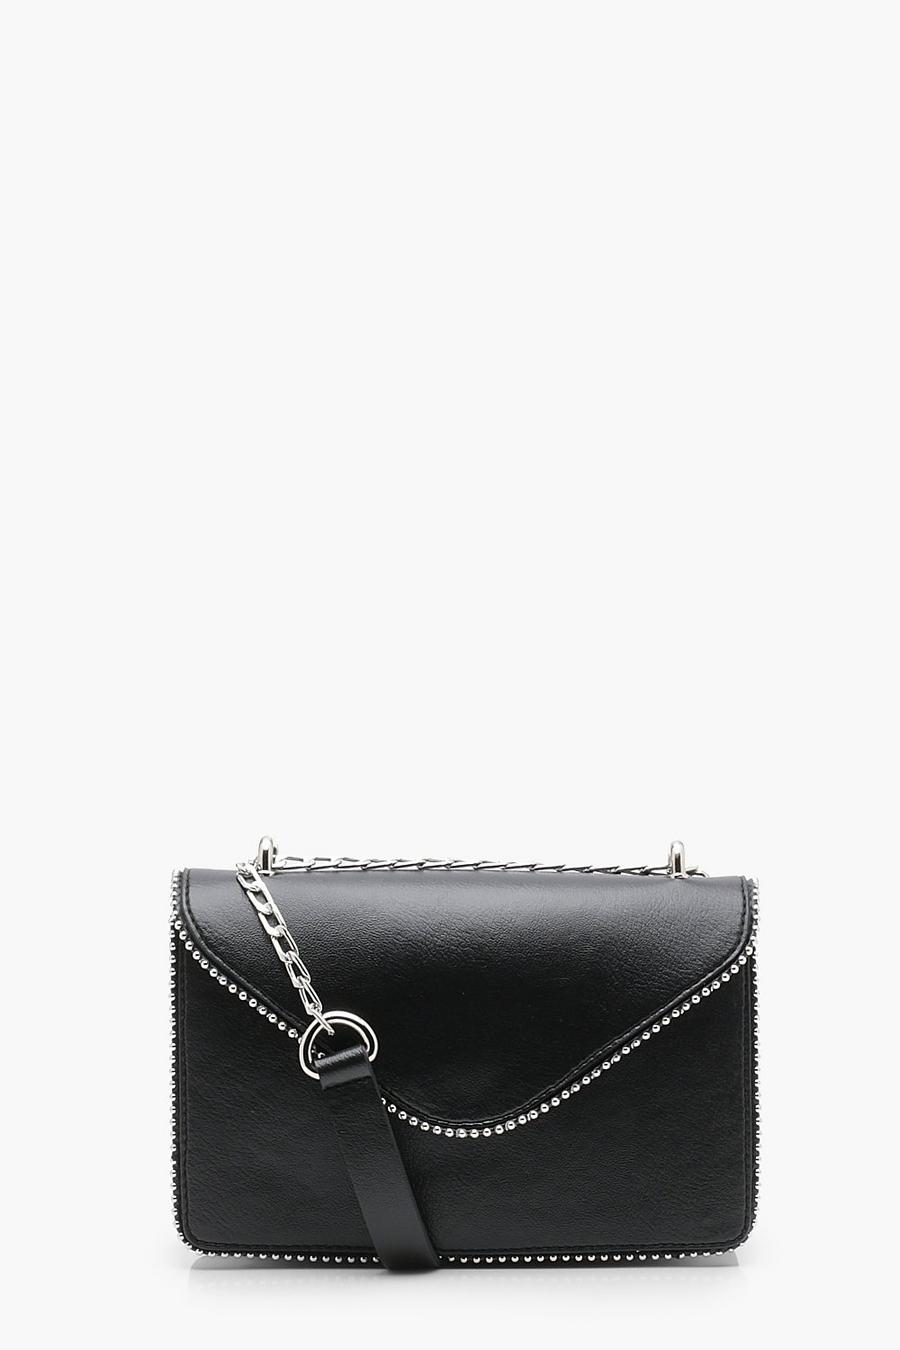 Black Cross Body With Chain Trim Detail image number 1